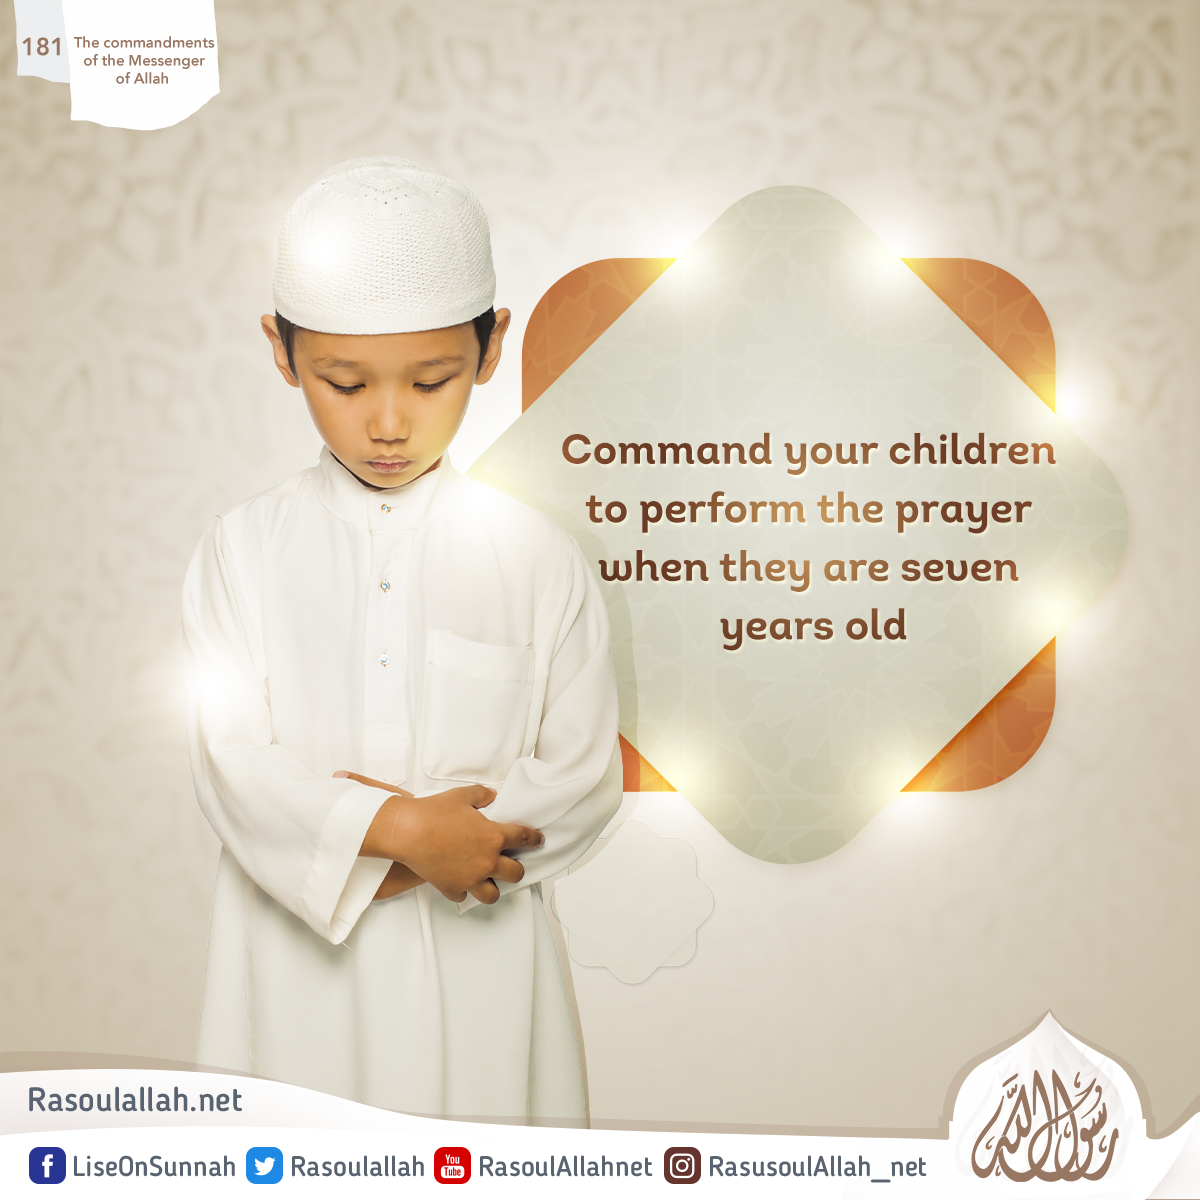 Command your children to perform the prayer when they are seven years old